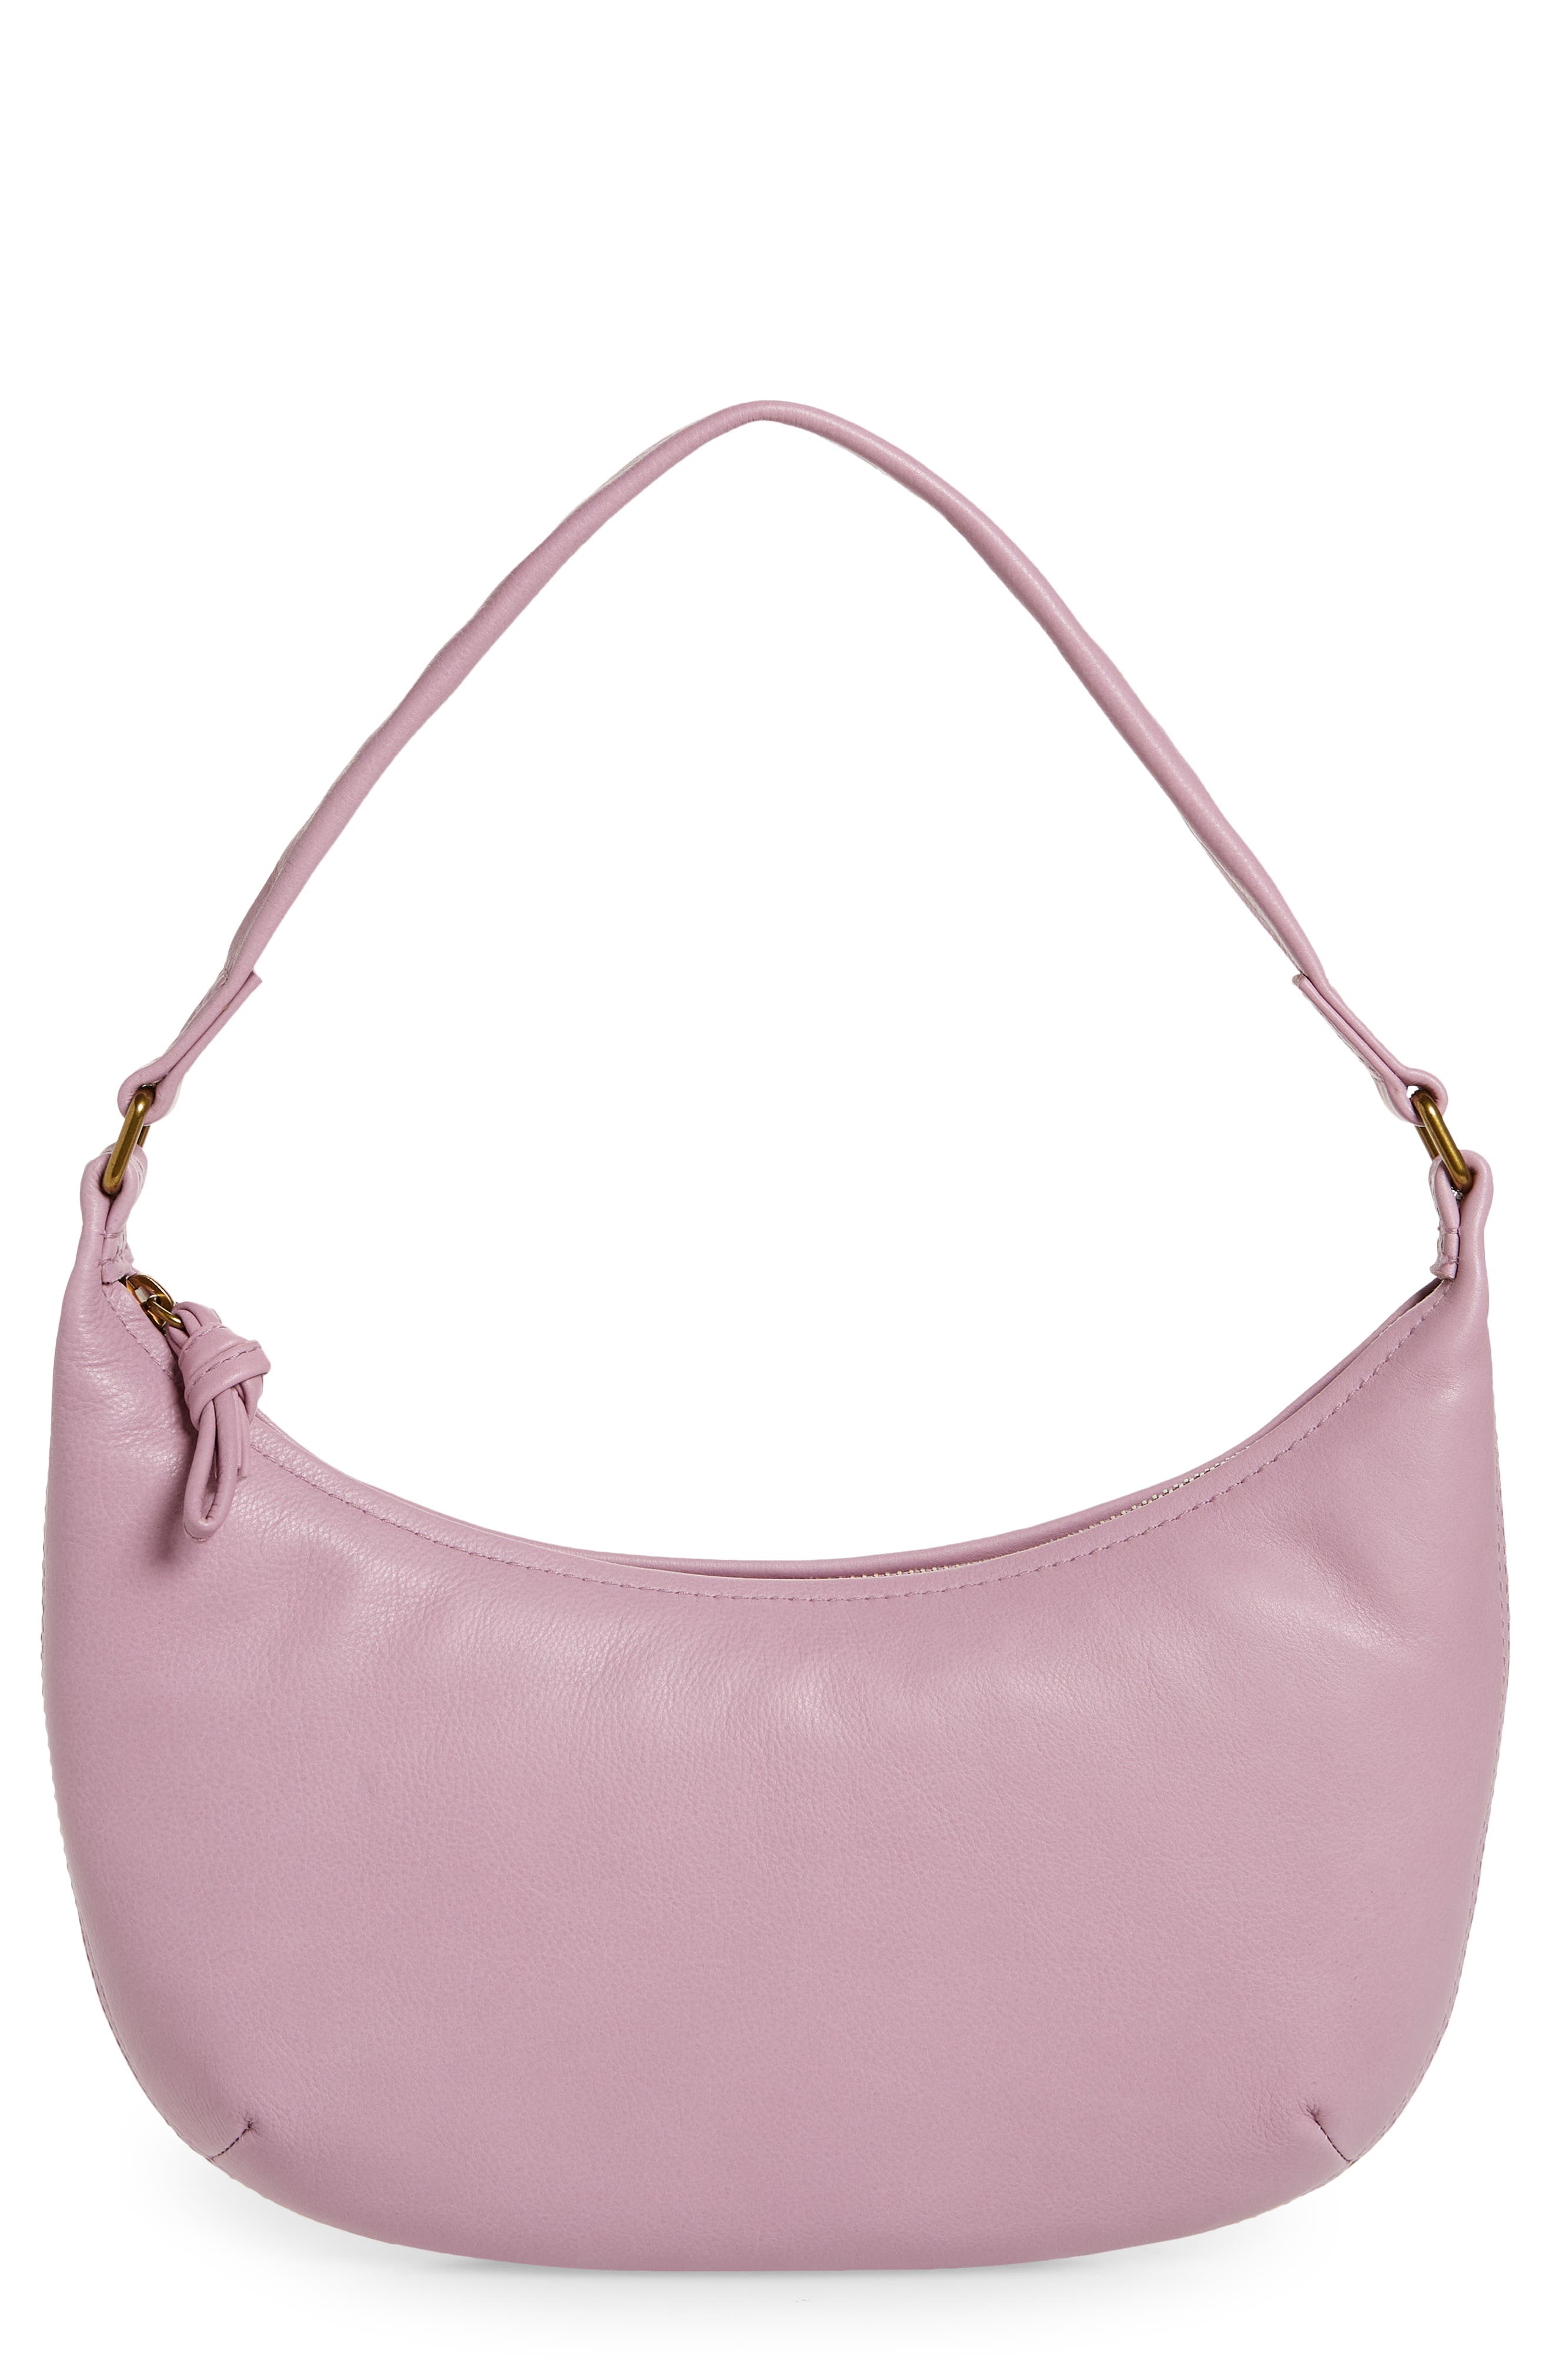 Madewell The Piazza Small Slouch Shoulder Bag - Vibrant Lilac